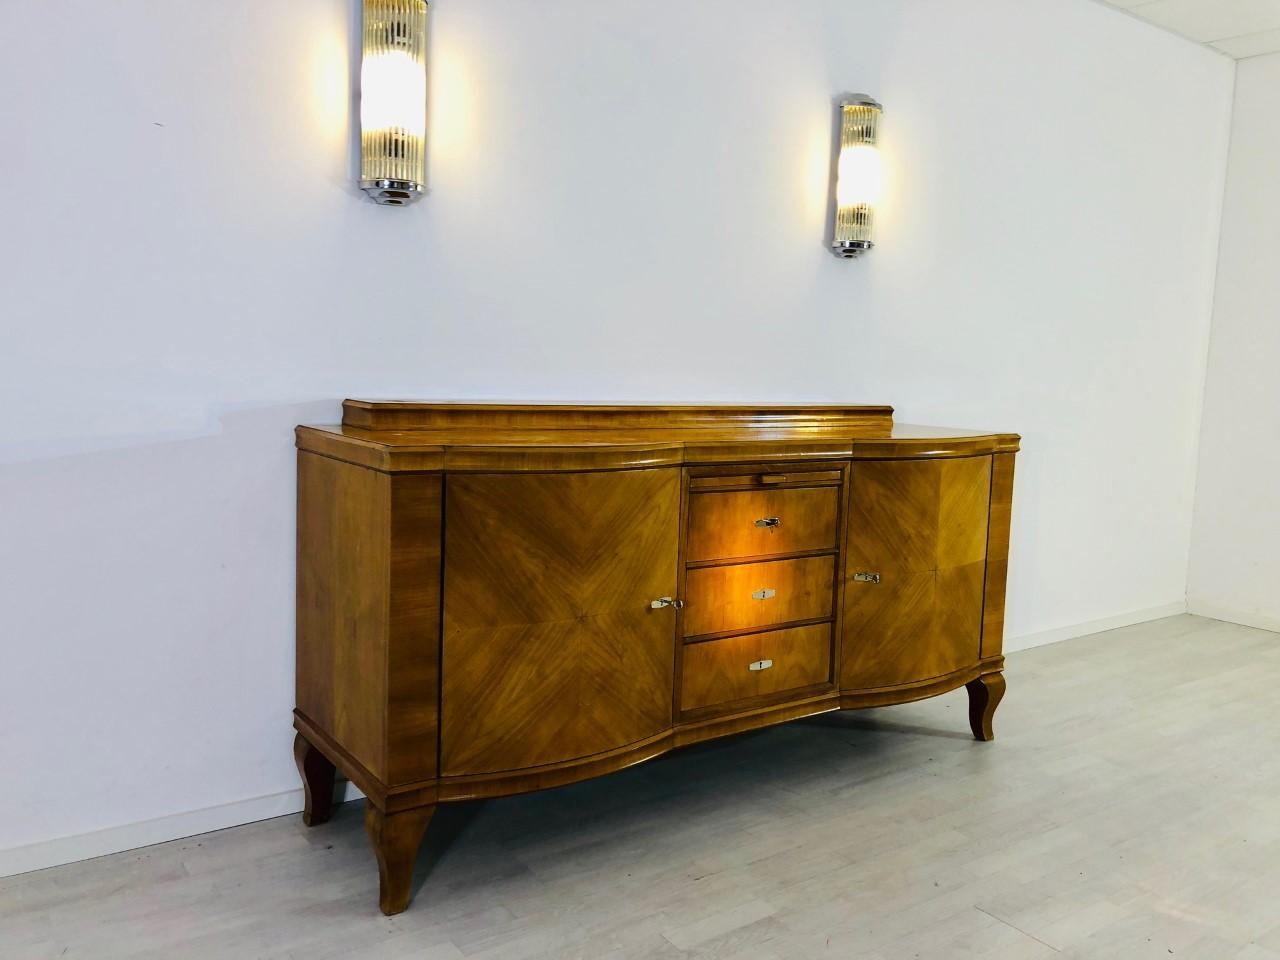 Original Art Deco sideboard or buffet from the 1920s. Veneered with a luxurious grained walnut wood with a beautiful, yellow gold color. Convinces with its unique Art Deco design, with wonderfully carved French feet and a hutch on the top plate. The